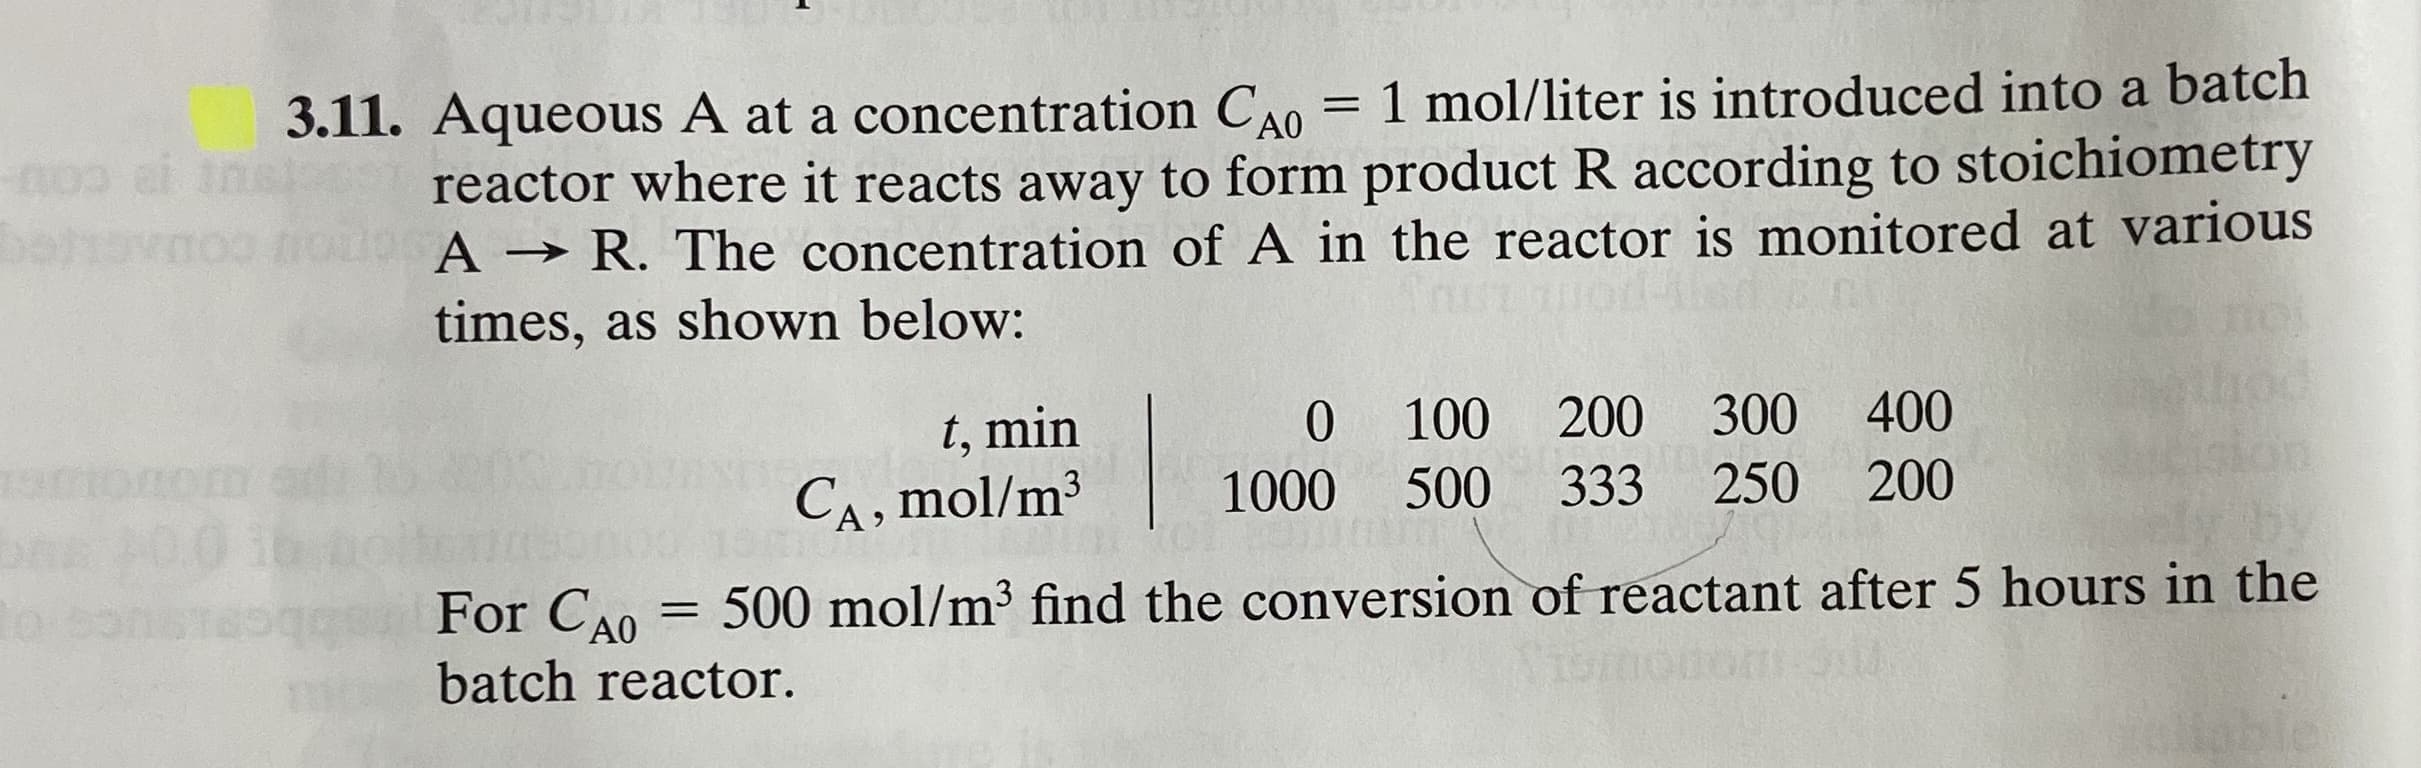 3.11. Aqueous A at a concentration CA0 = 1 mol/liter is introduced into a batch
reactor where it reacts away to form product R according to stoichiometry
A → R. The concentration of A in the reactor is monitored at various
times, as shown below:
0 100
200 300
400
t, min
CA, mol/m3
1000
500
333
250
200
For CA0
500 mol/m³ find the conversion of reactant after 5 hours in the
%3D
batch reactor.
